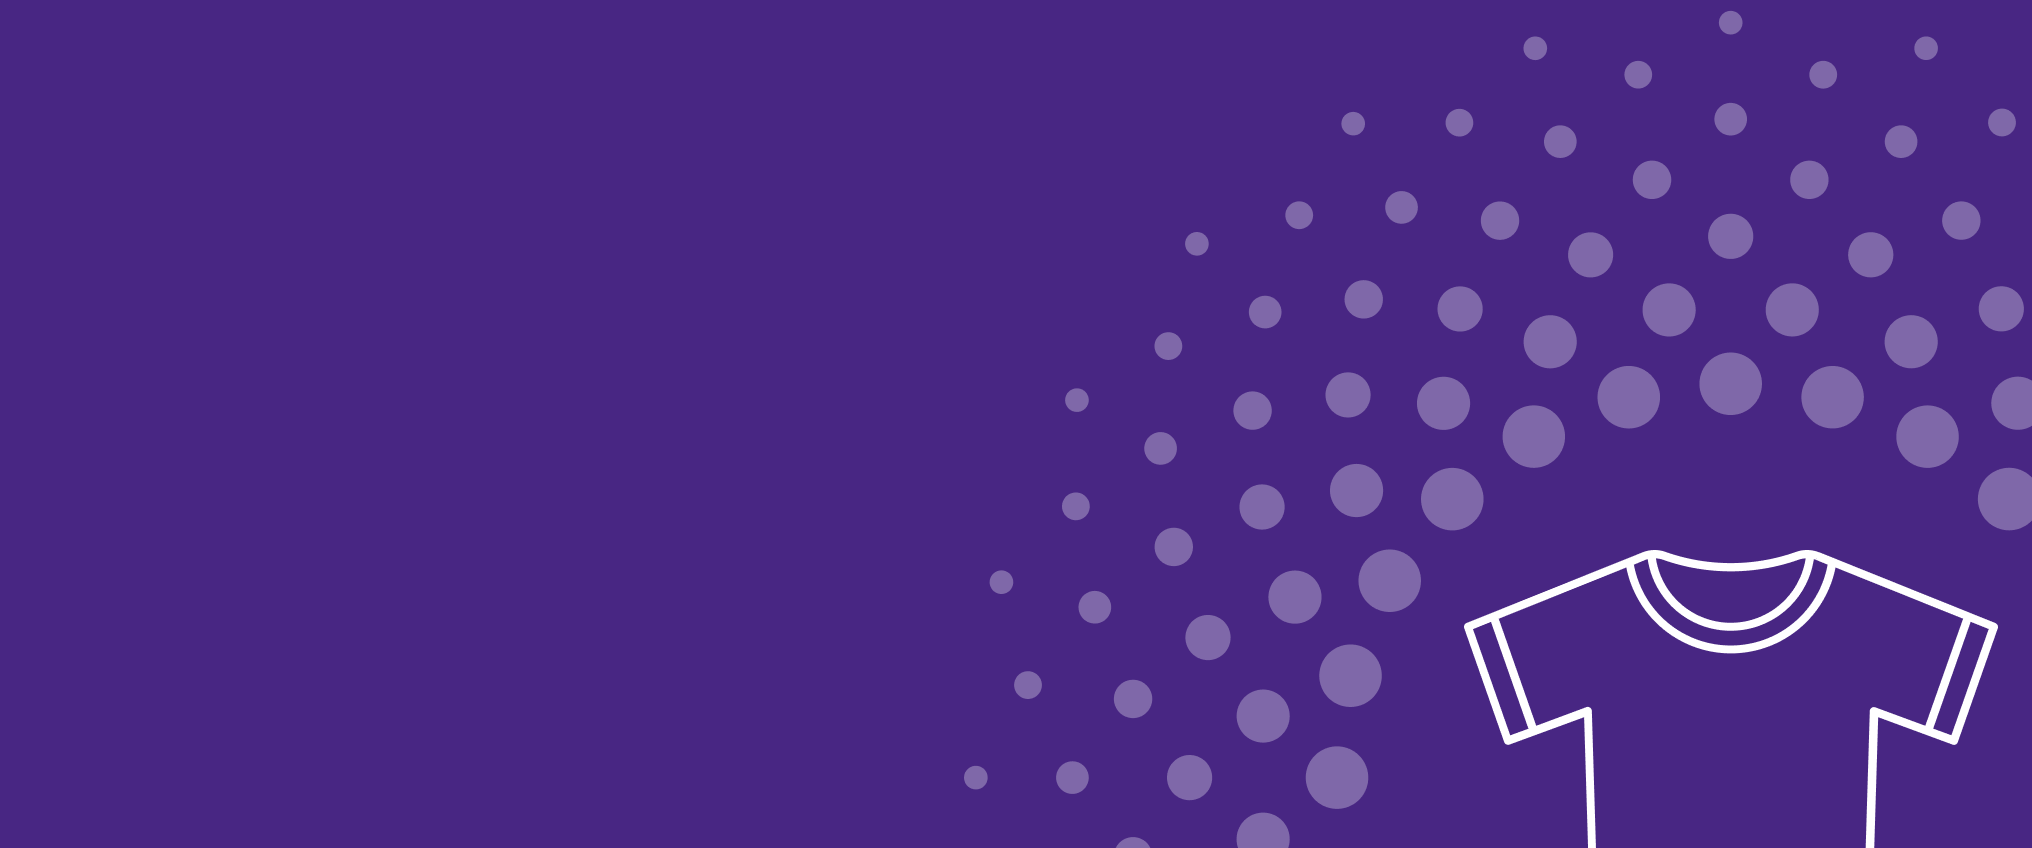 dots on purple background with fashion illustration